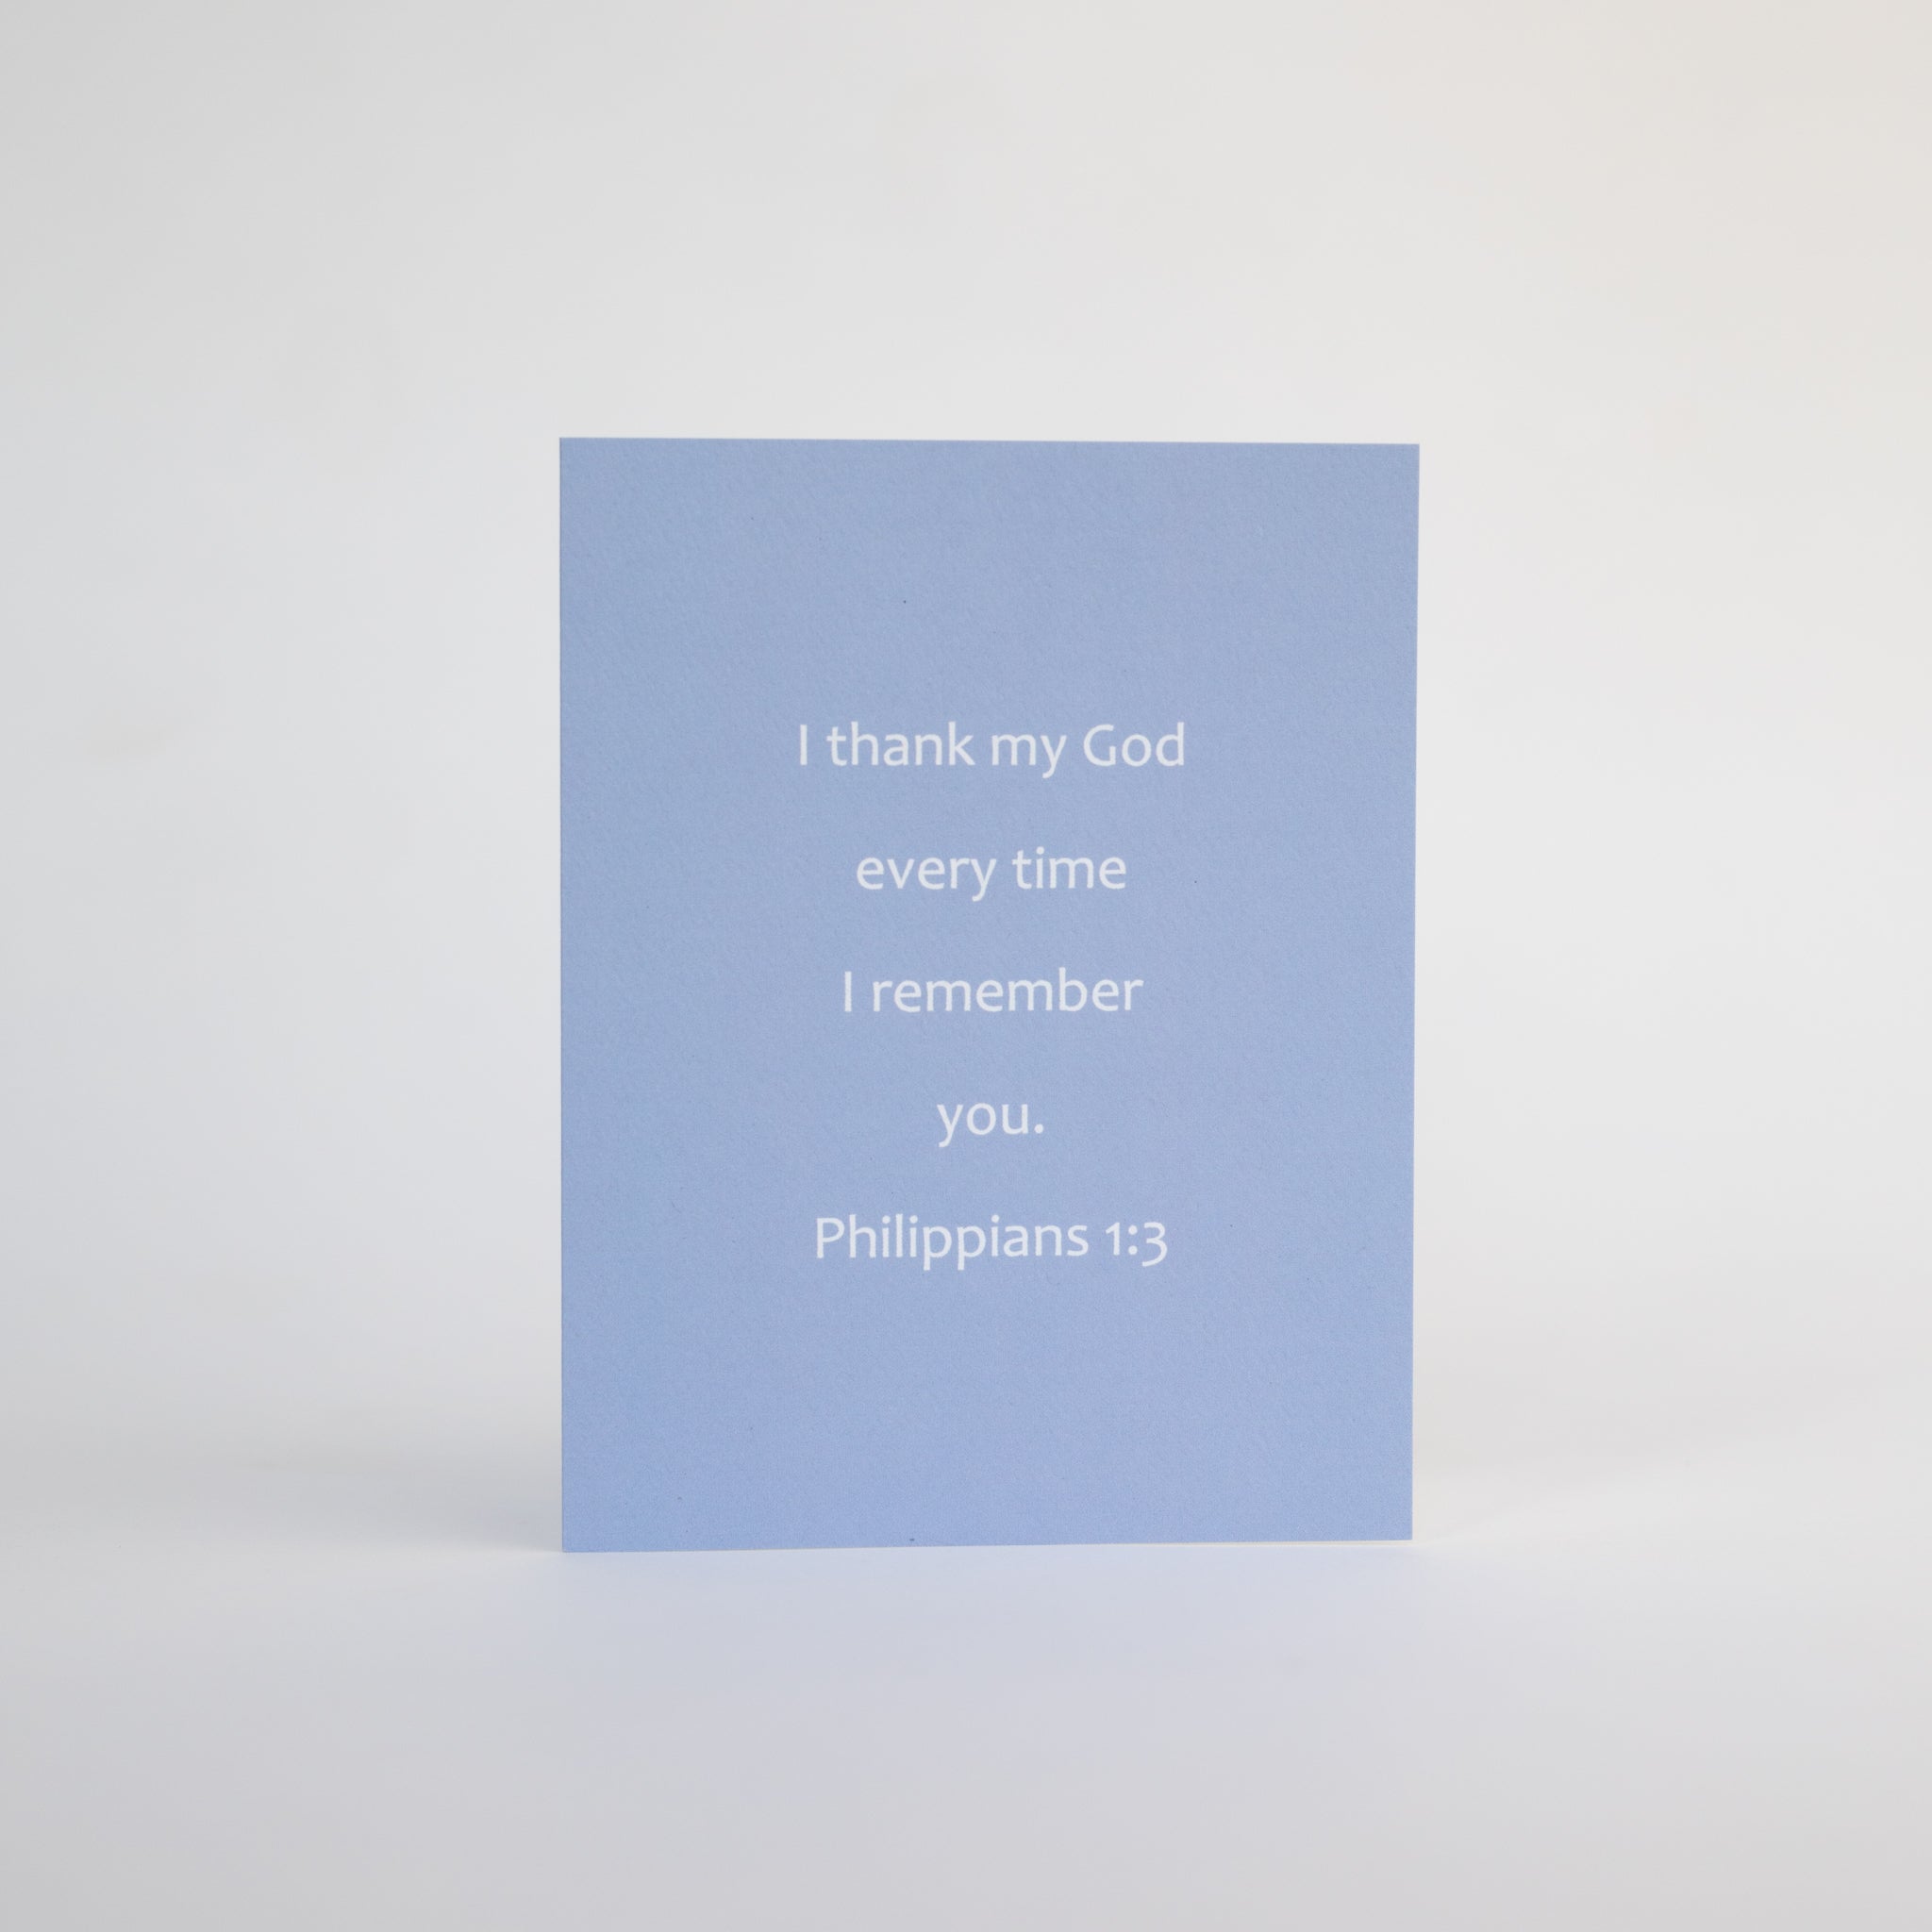 Christian bible verse birthday or friendship greeting card featuring Philippians 1:3. This card invites readers to greater faith as they read the featured scripture in context in the Bible. Inspirational greeting cards based on scripture offer solid hope to friends and family.